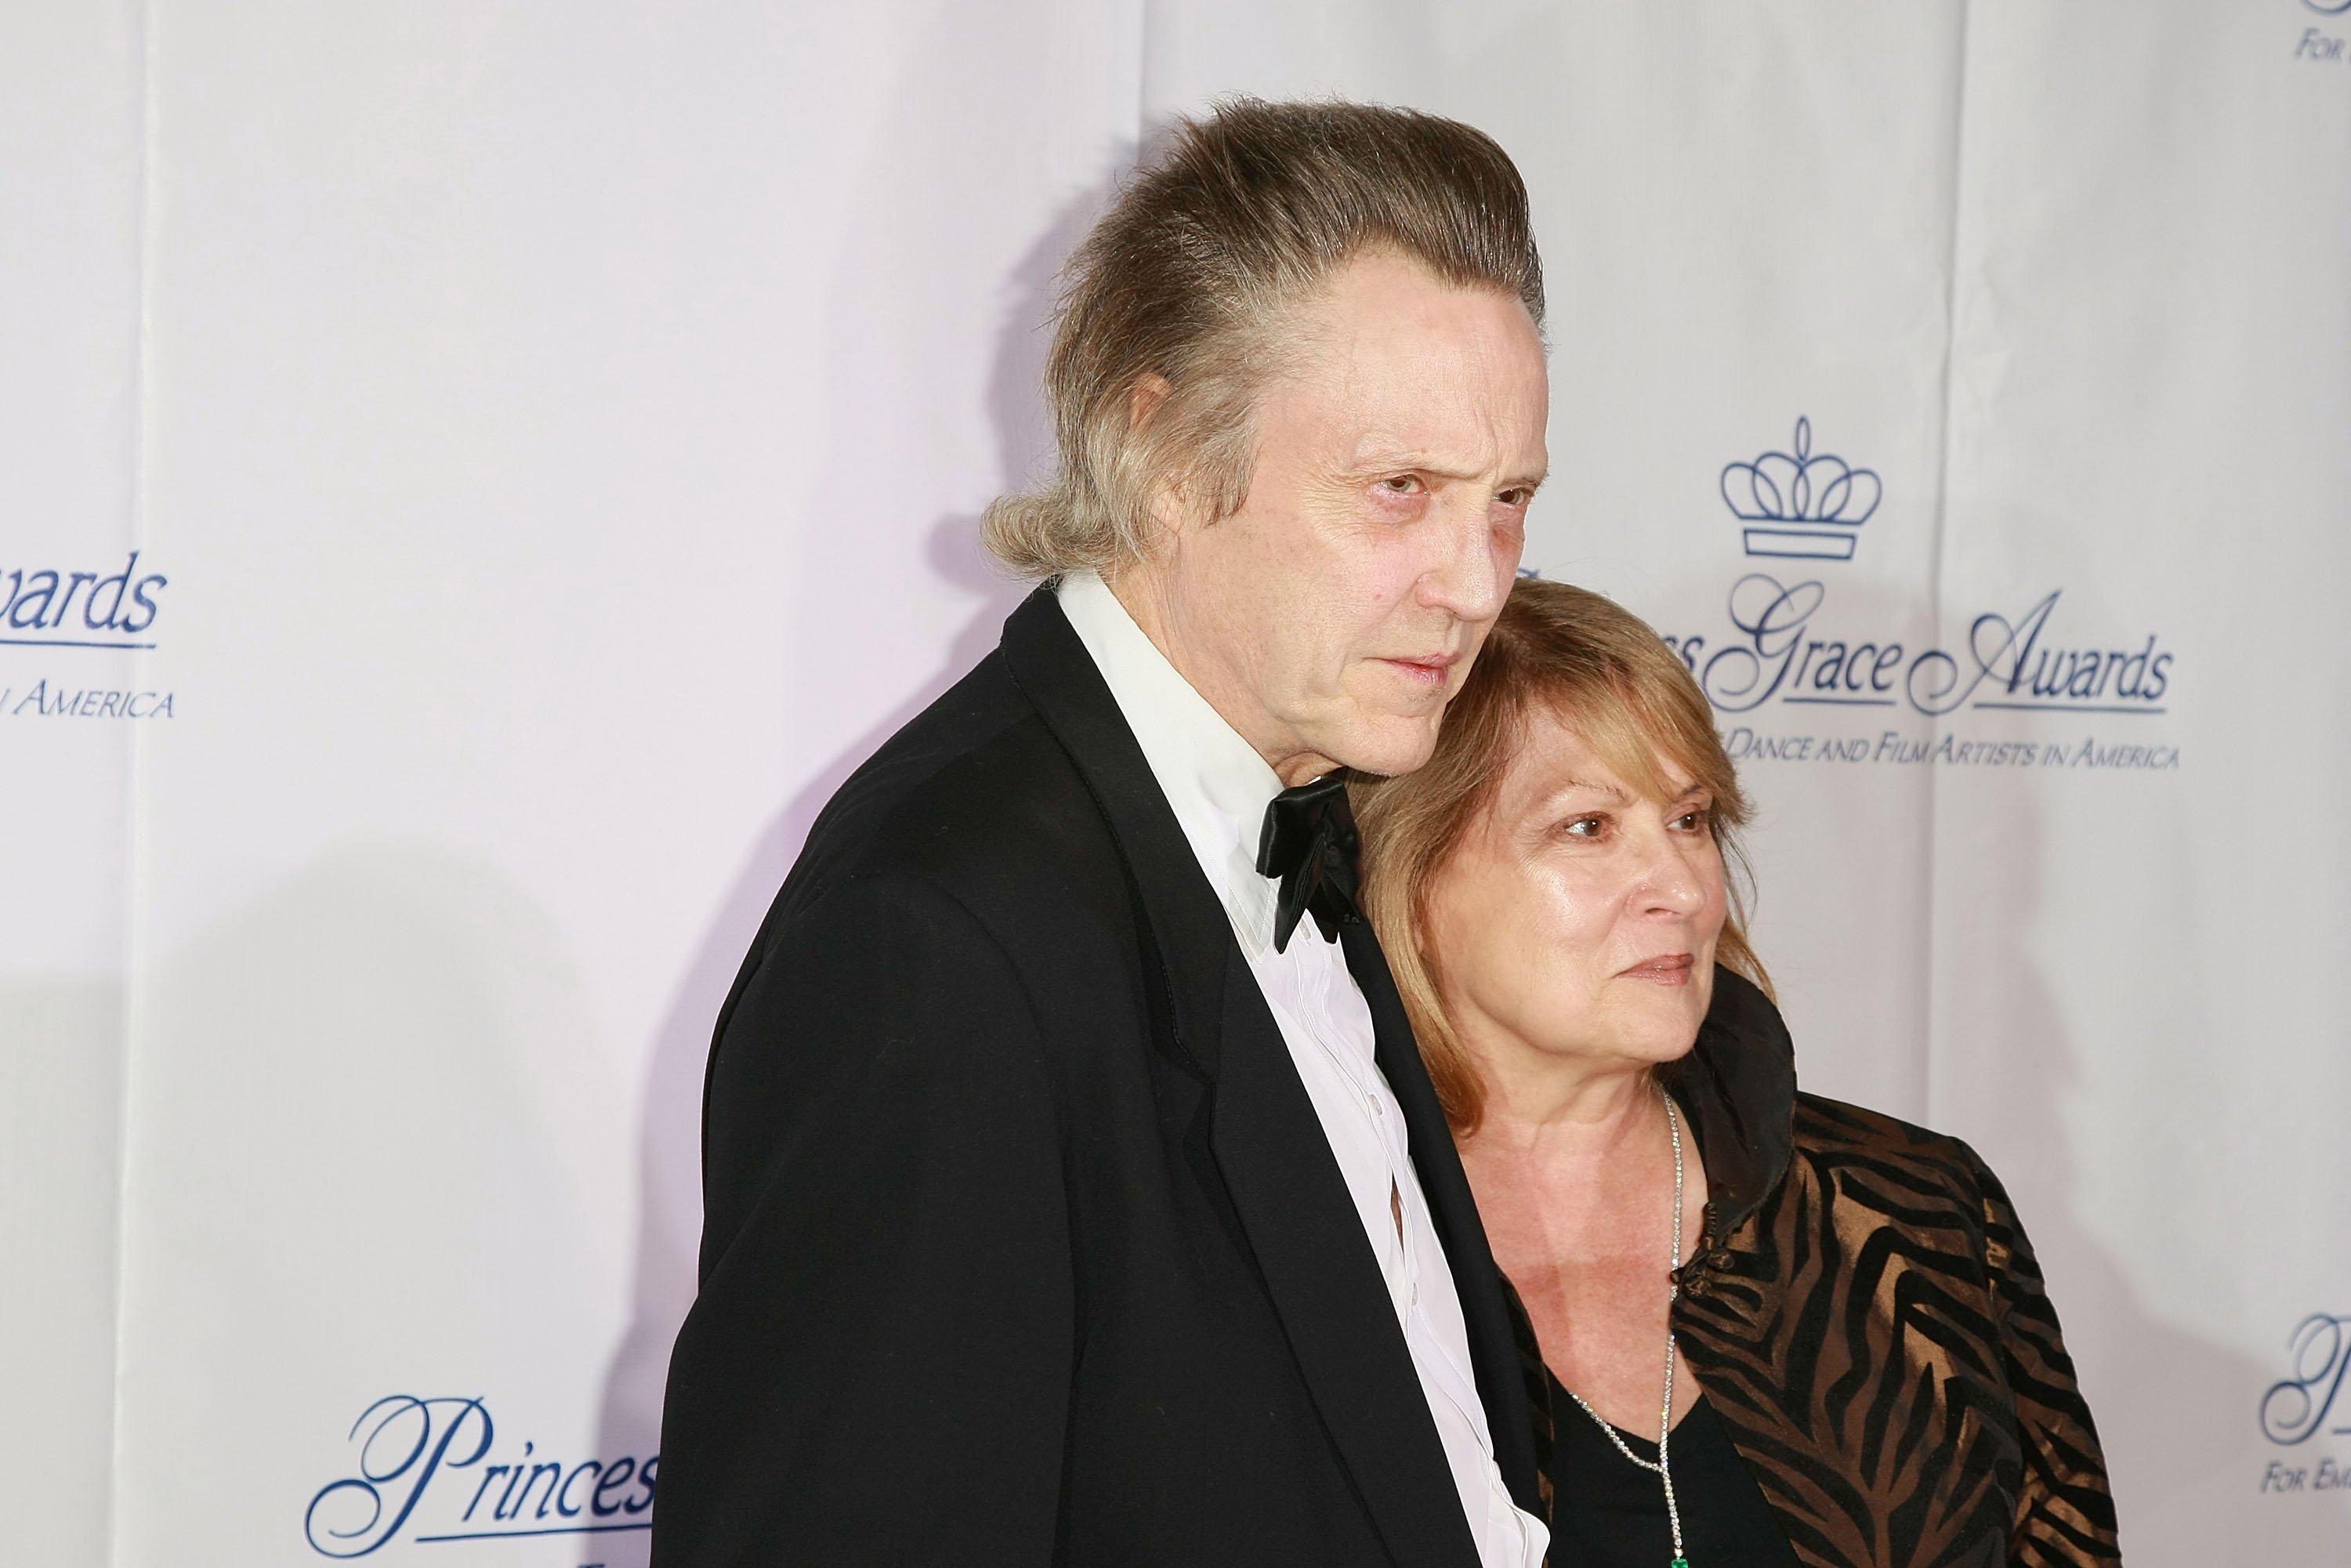 Christopher Walken and wife Georgianne Walken attend the 2008 Princess Grace Awards Gala at Cipriani 42nd Street on October 15, 2008 in New York City | Souce: Getty Images